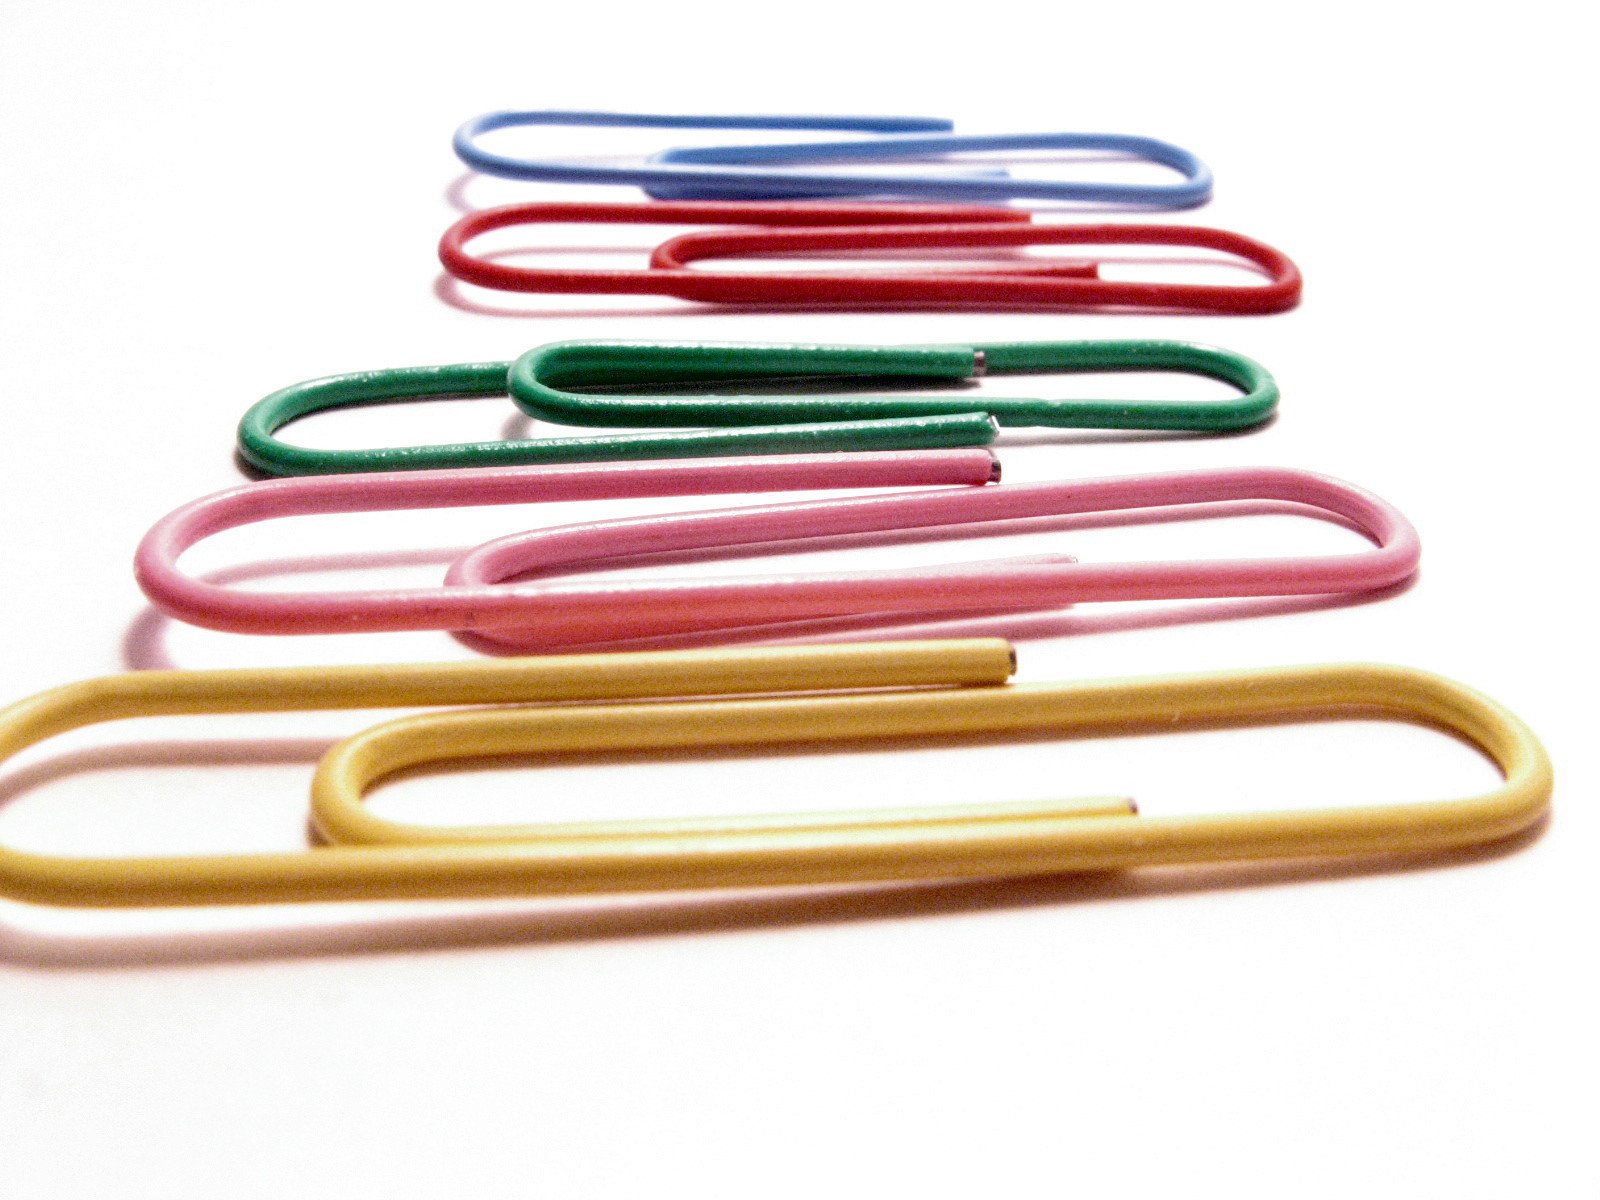 several colored paper clips laying next to each other